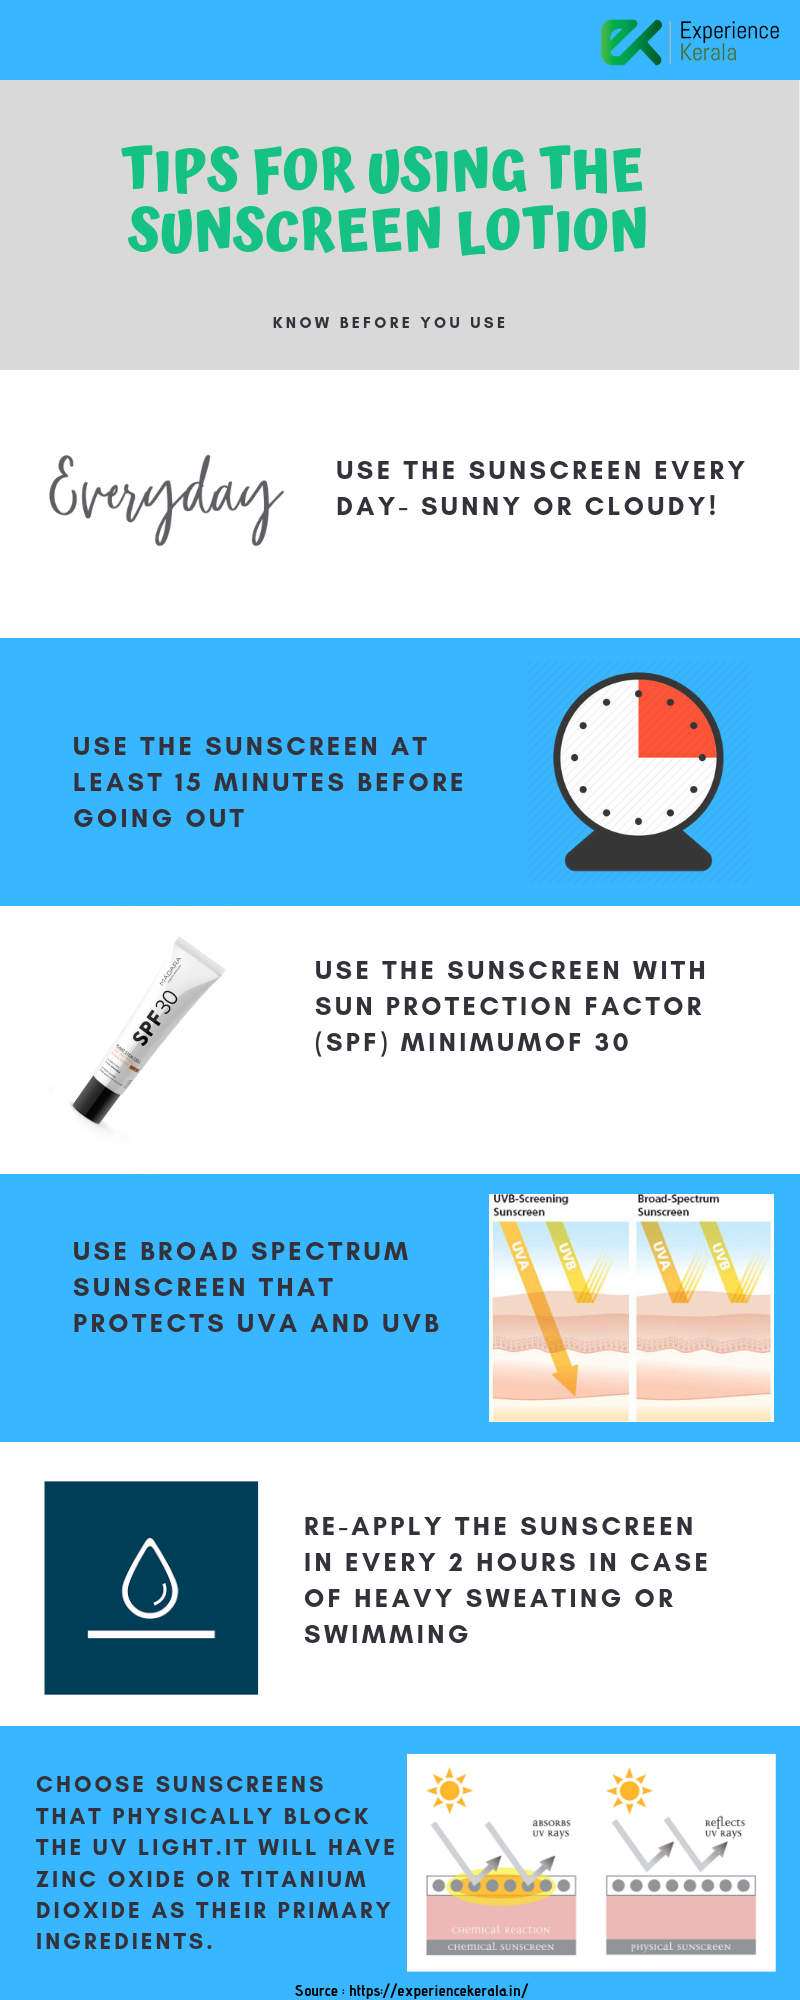 Tips for using Sunscreen